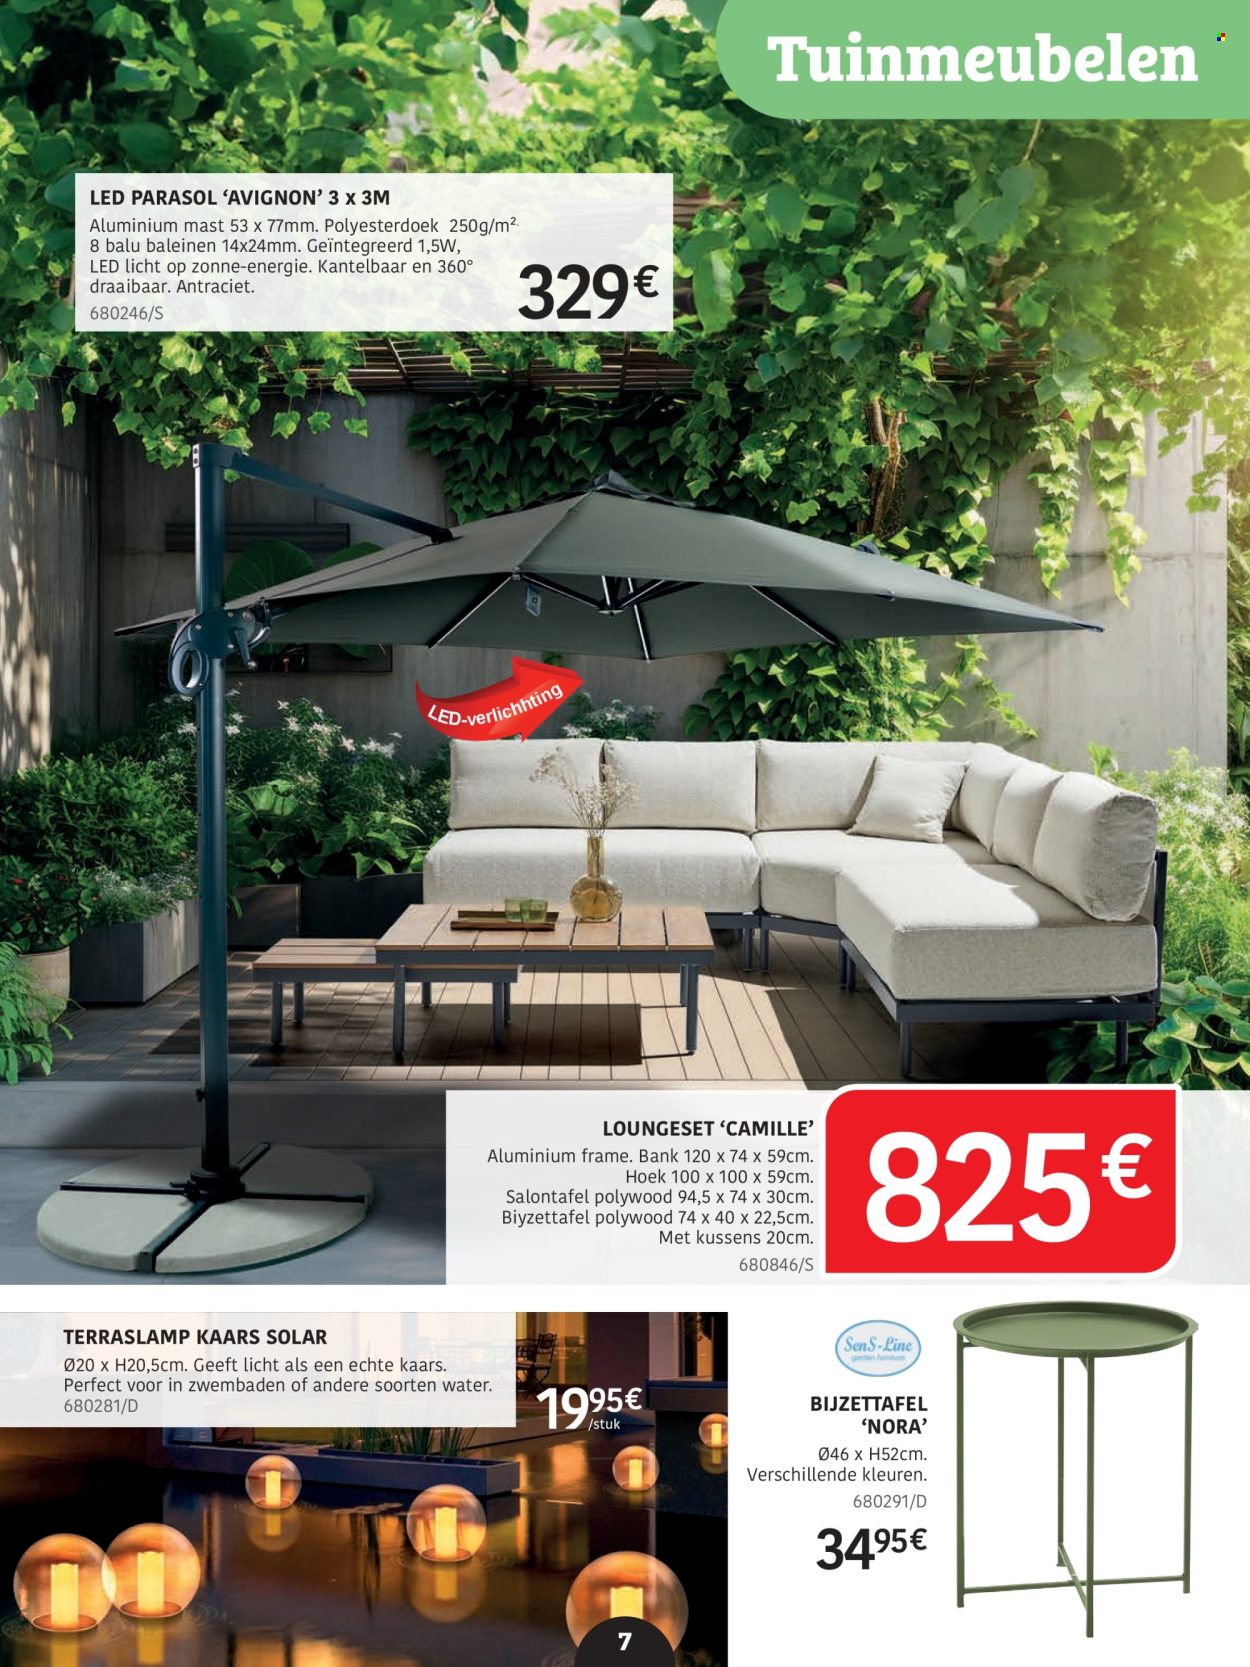 Catalogue HandyHome - 4.4.2024 - 30.6.2024. Page 7.